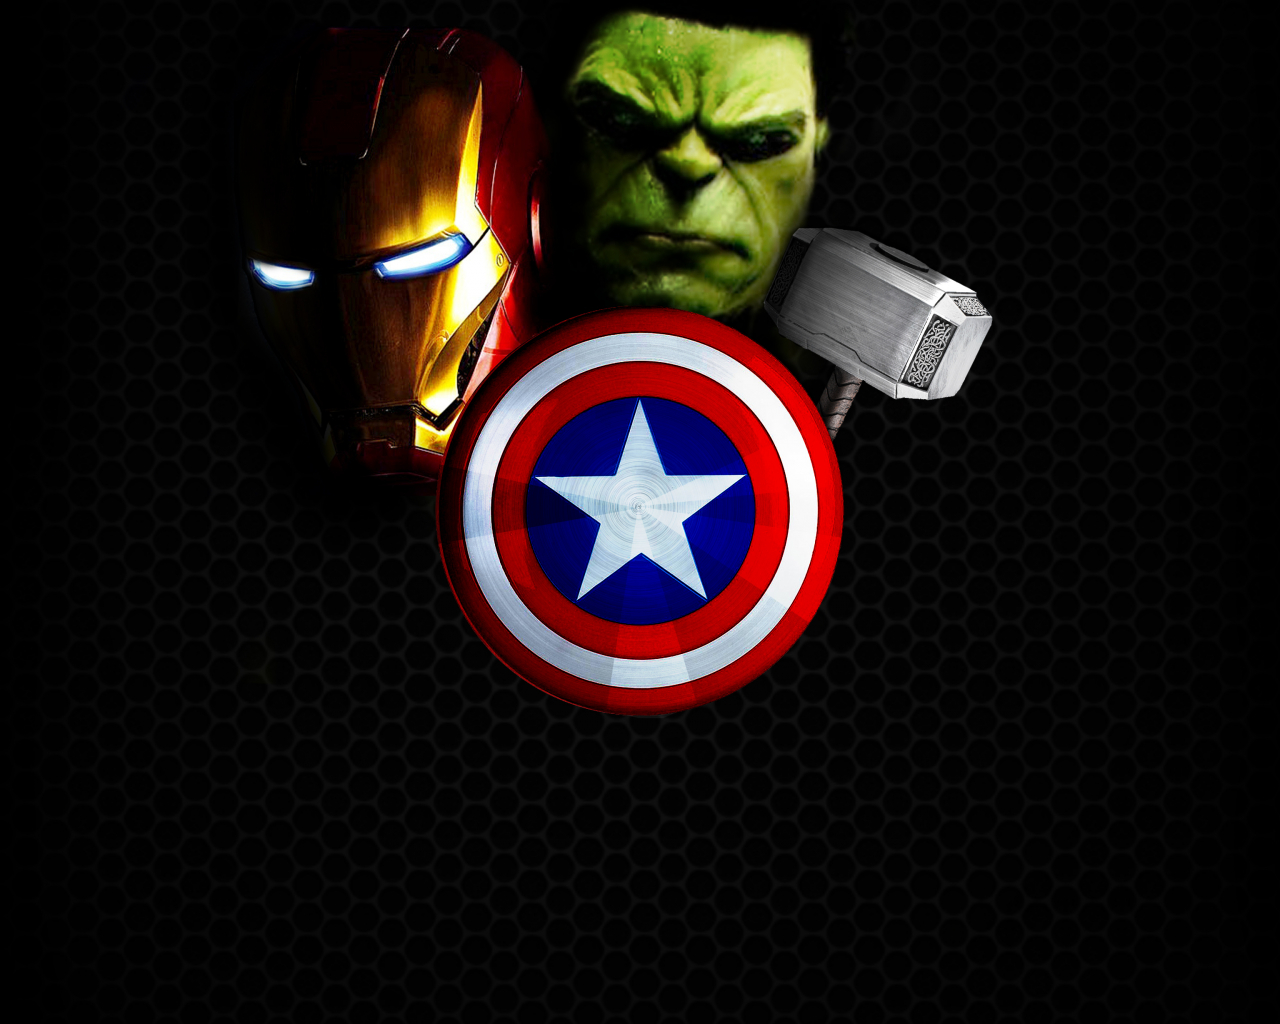 Free download wallpaper science fiction avengers HD ipad iphone android wallpaper hi [3072x4096] for your Desktop, Mobile & Tablet. Explore Avengers Phone Wallpaper. Avengers Computer Wallpaper, Avengers Wallpaper Download